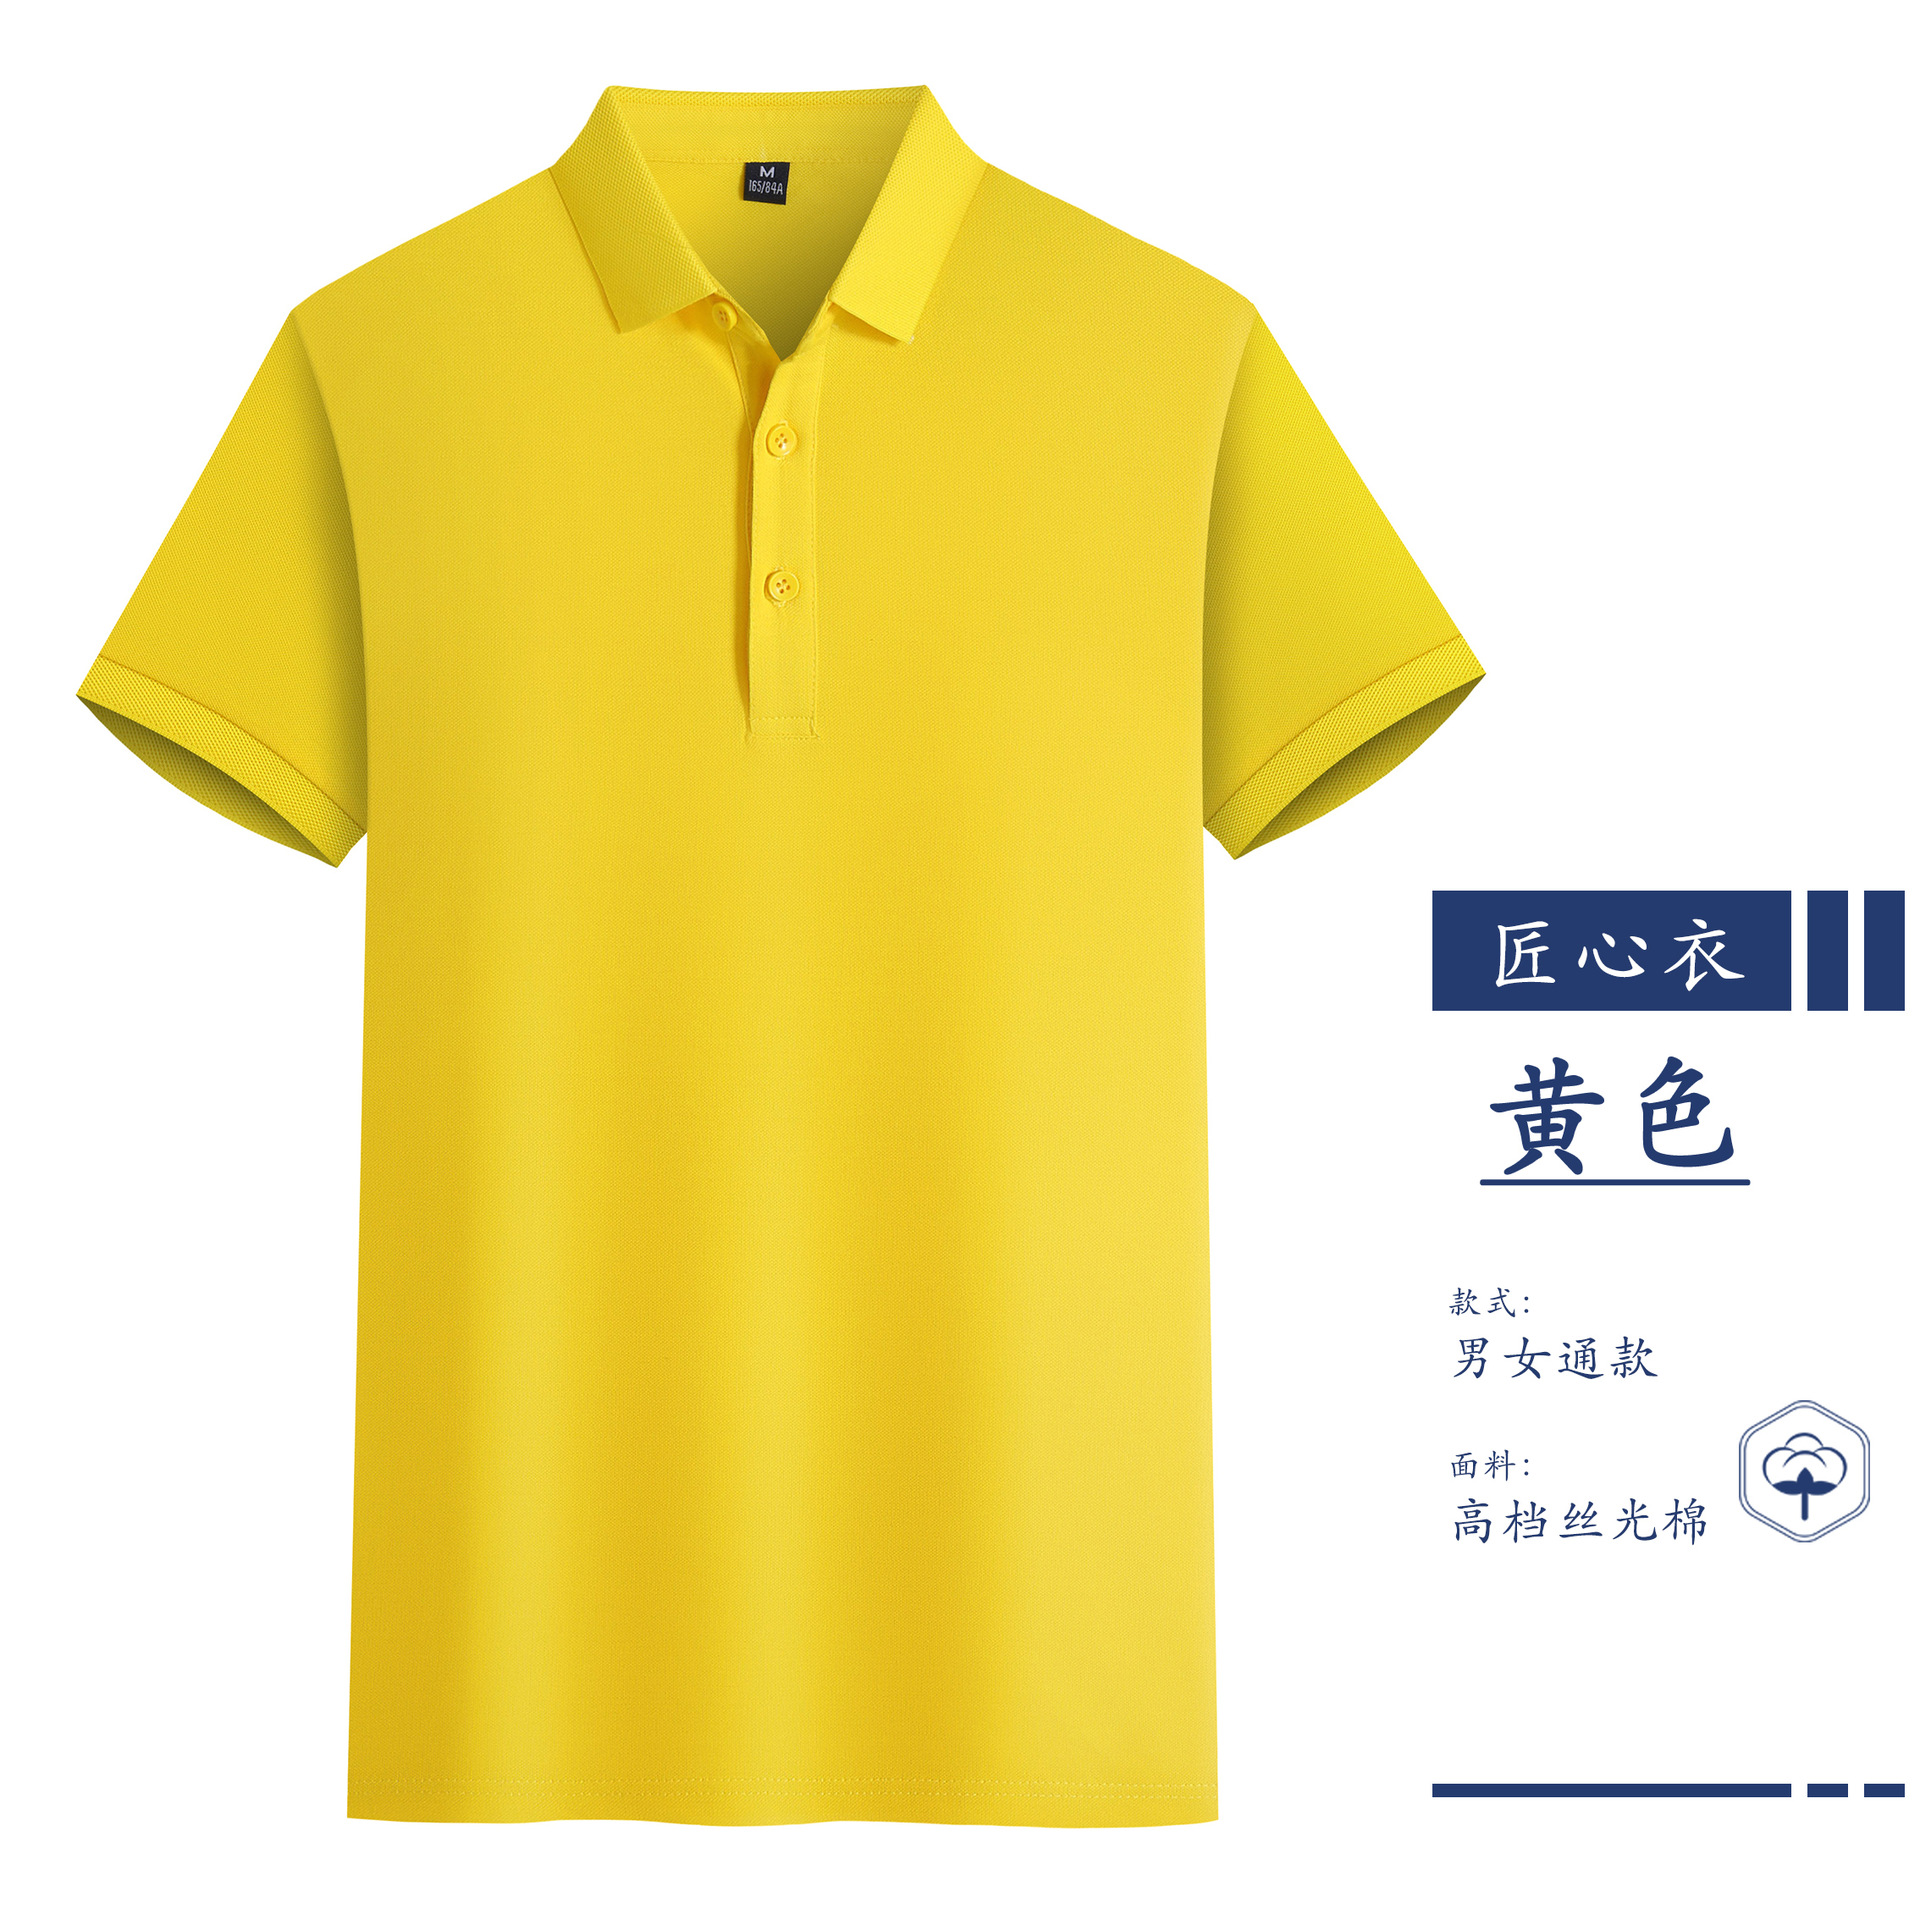 Polo Shirt Customized Short-Sleeved Lapel Work Wear Customized Business Work Clothes T-shirt Customized Advertising Cultural Shirt Printed Logo